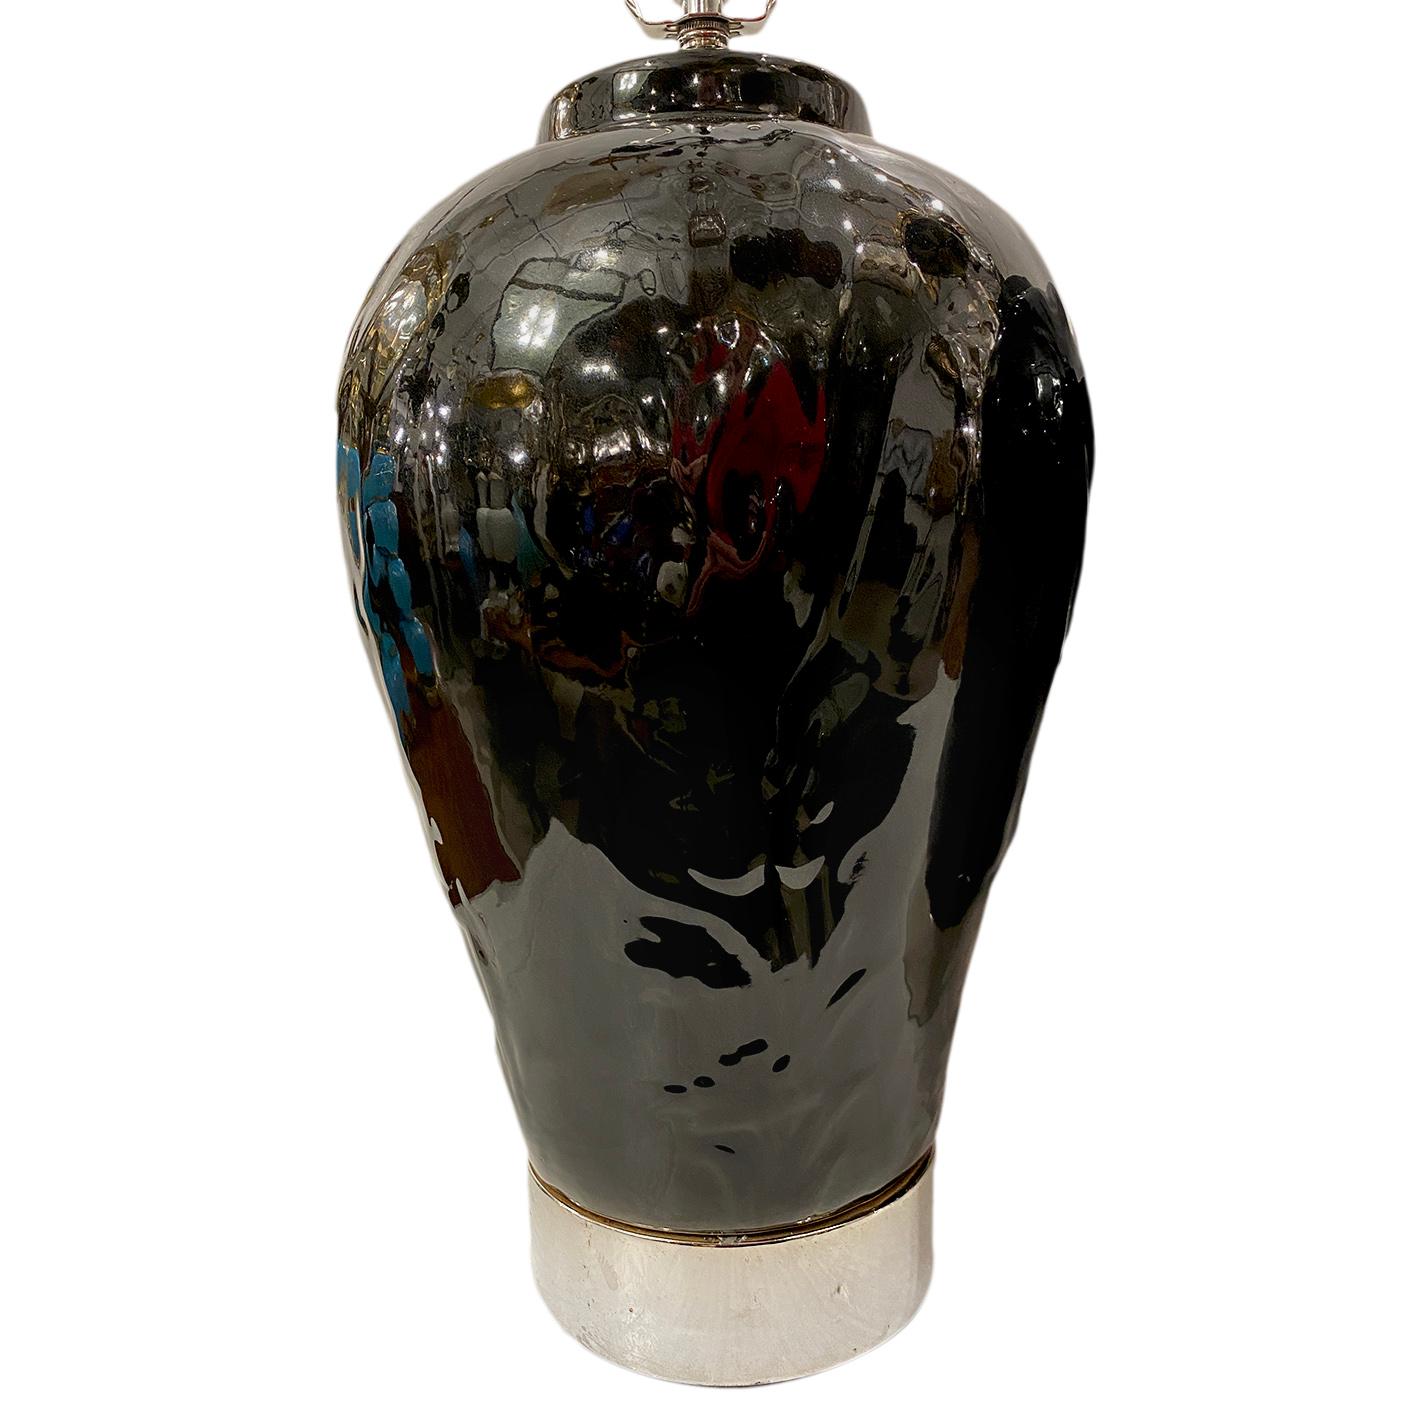 A pair of circa 1950s black porcelain table lamps with silver plated bases.

Measurements:
Height of body 18”
Width 11”.